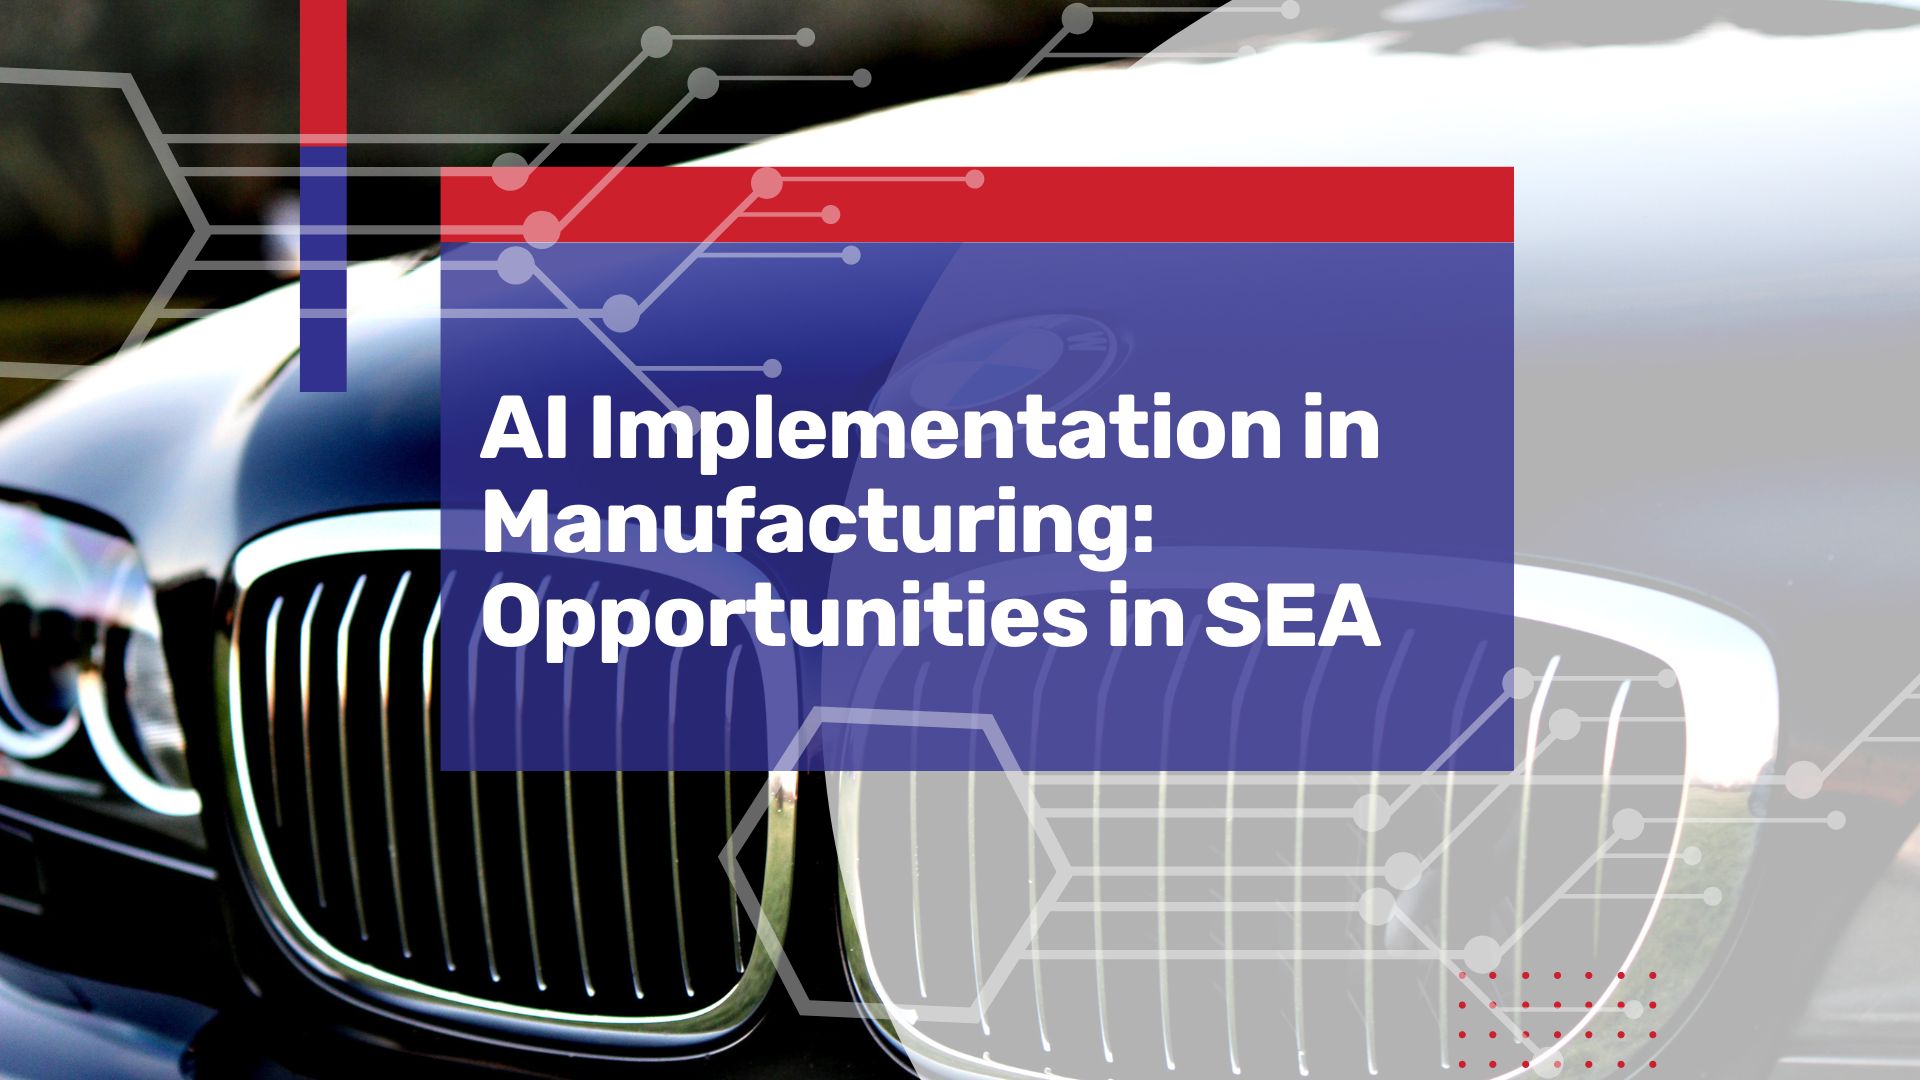 Implementing AI in Manufacturing: Opportunites for Southeast Asia